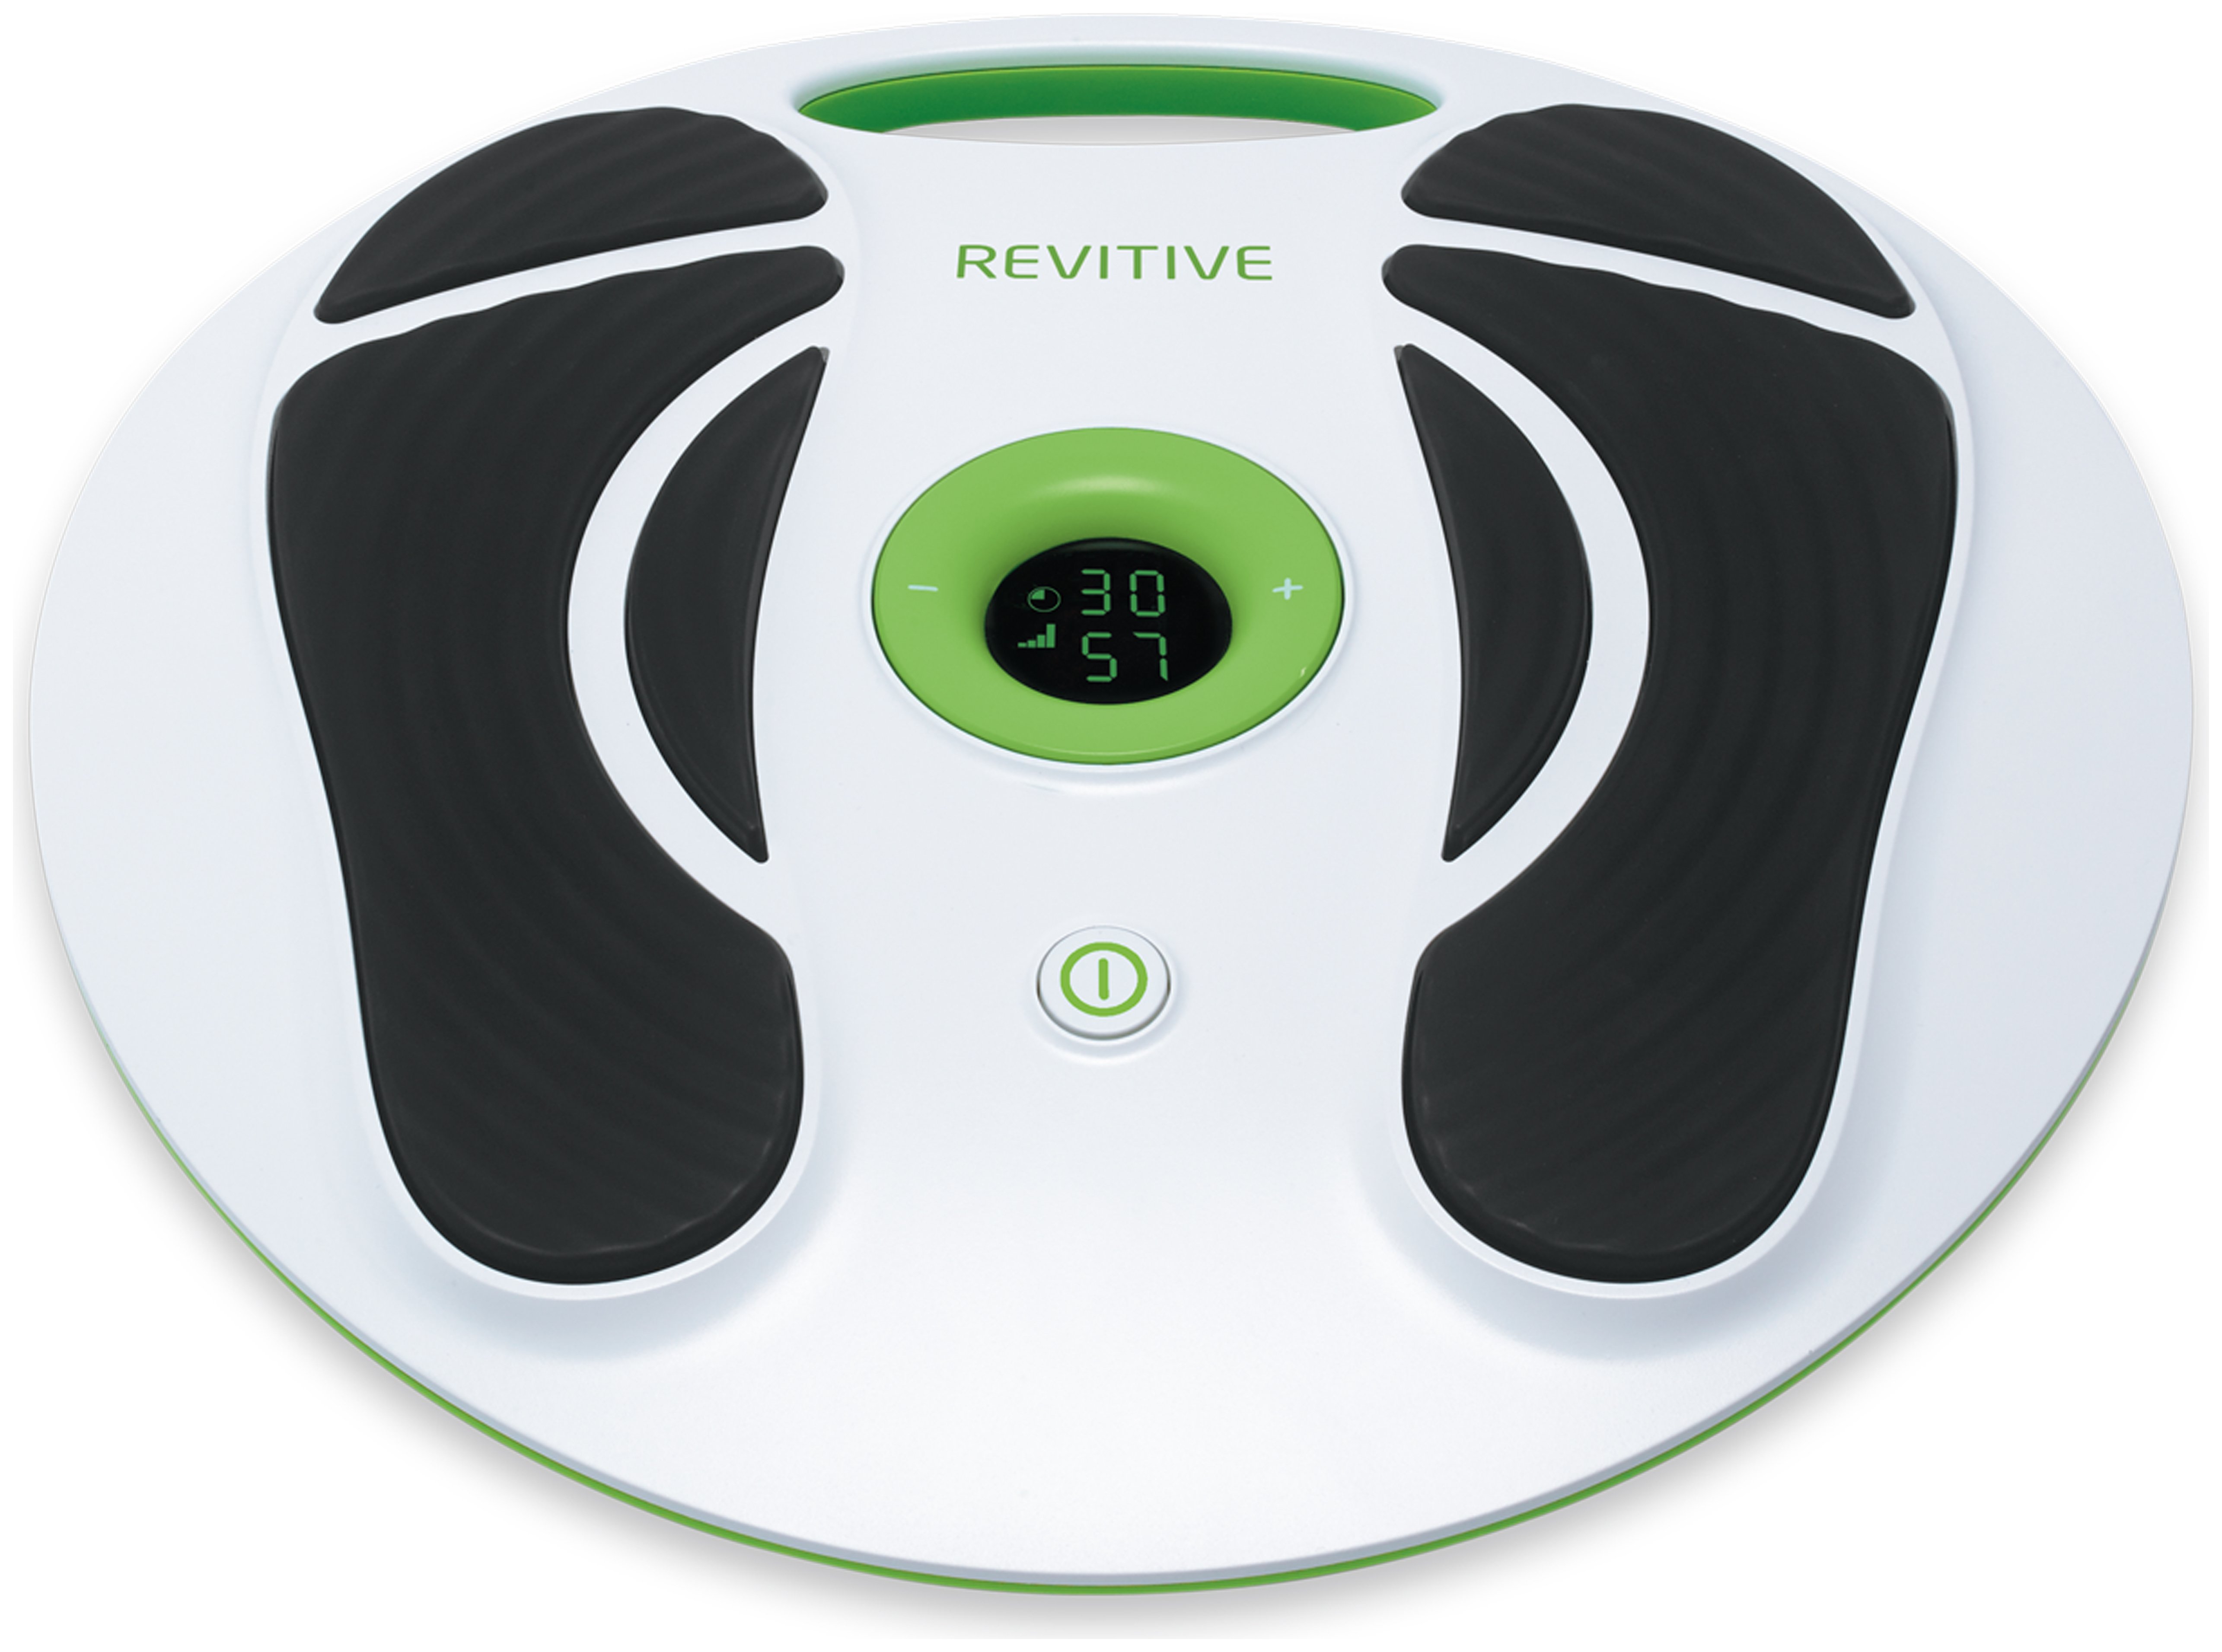 Revitive Advanced Performance Circulation Booster